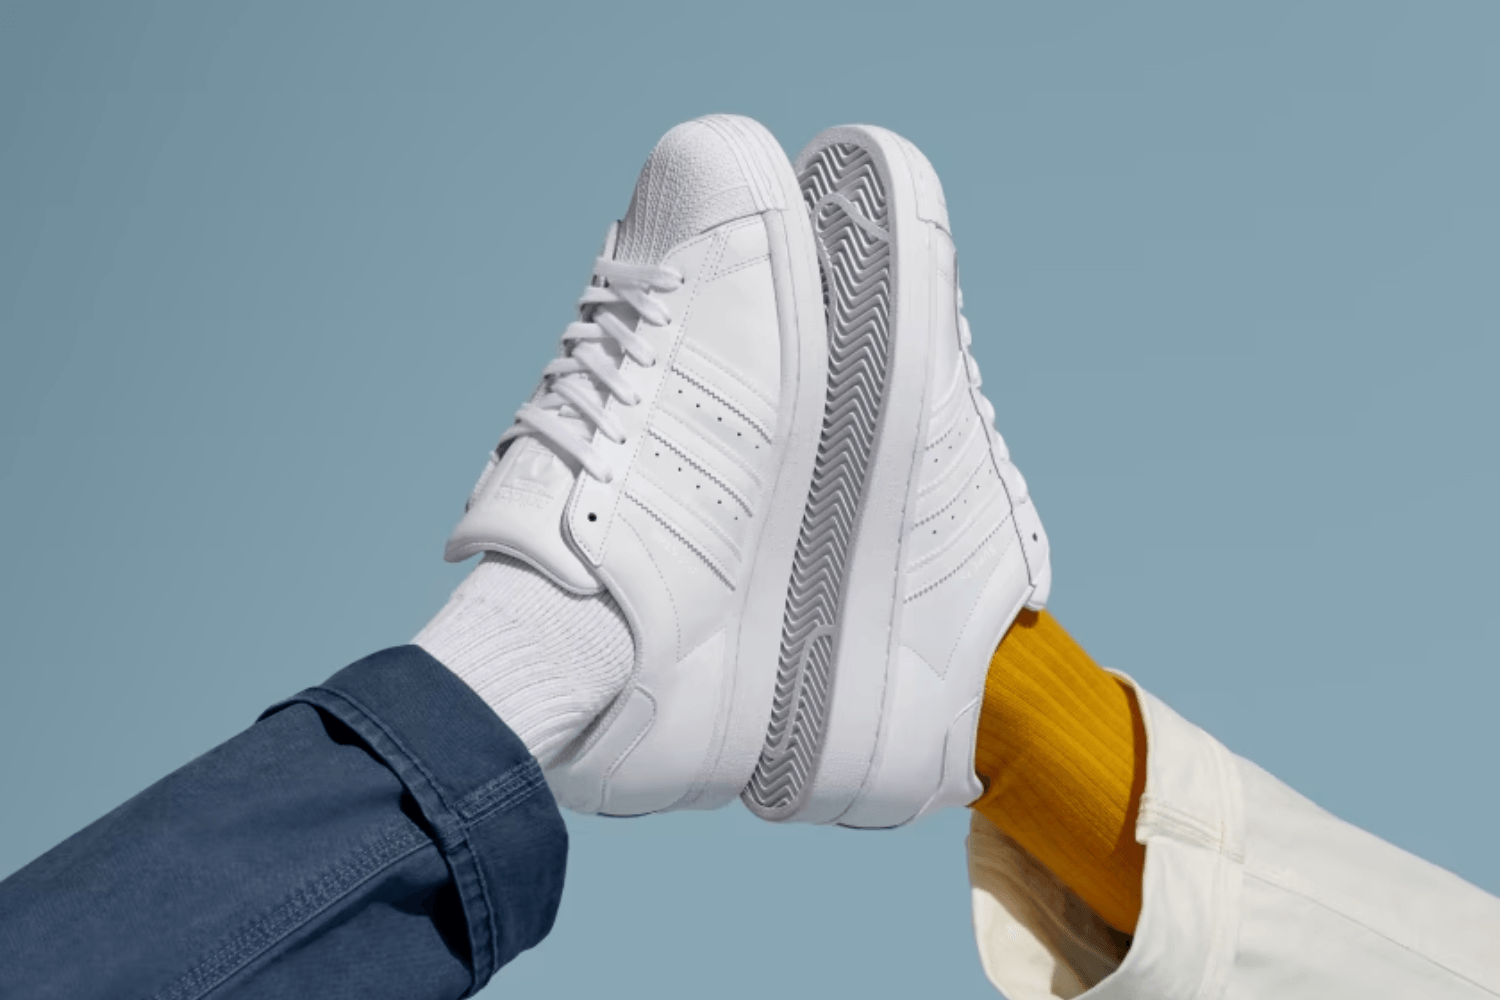 Embrace timeless style with these white sneakers from adidas